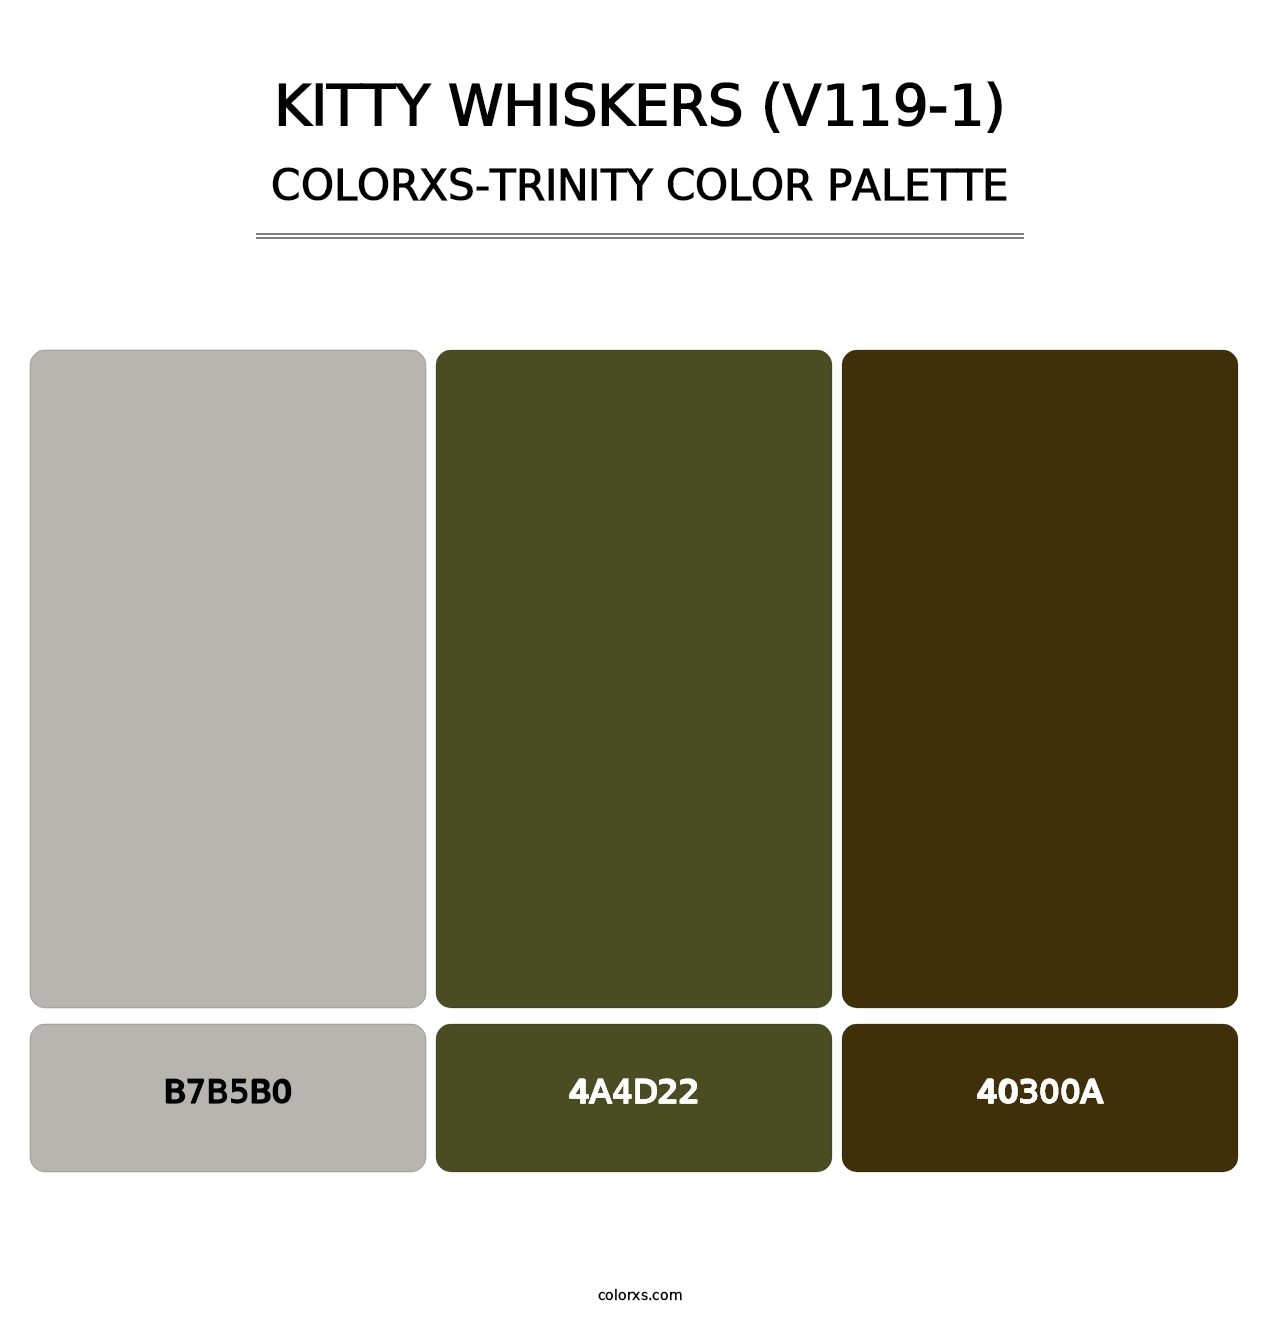 Kitty Whiskers (V119-1) - Colorxs Trinity Palette